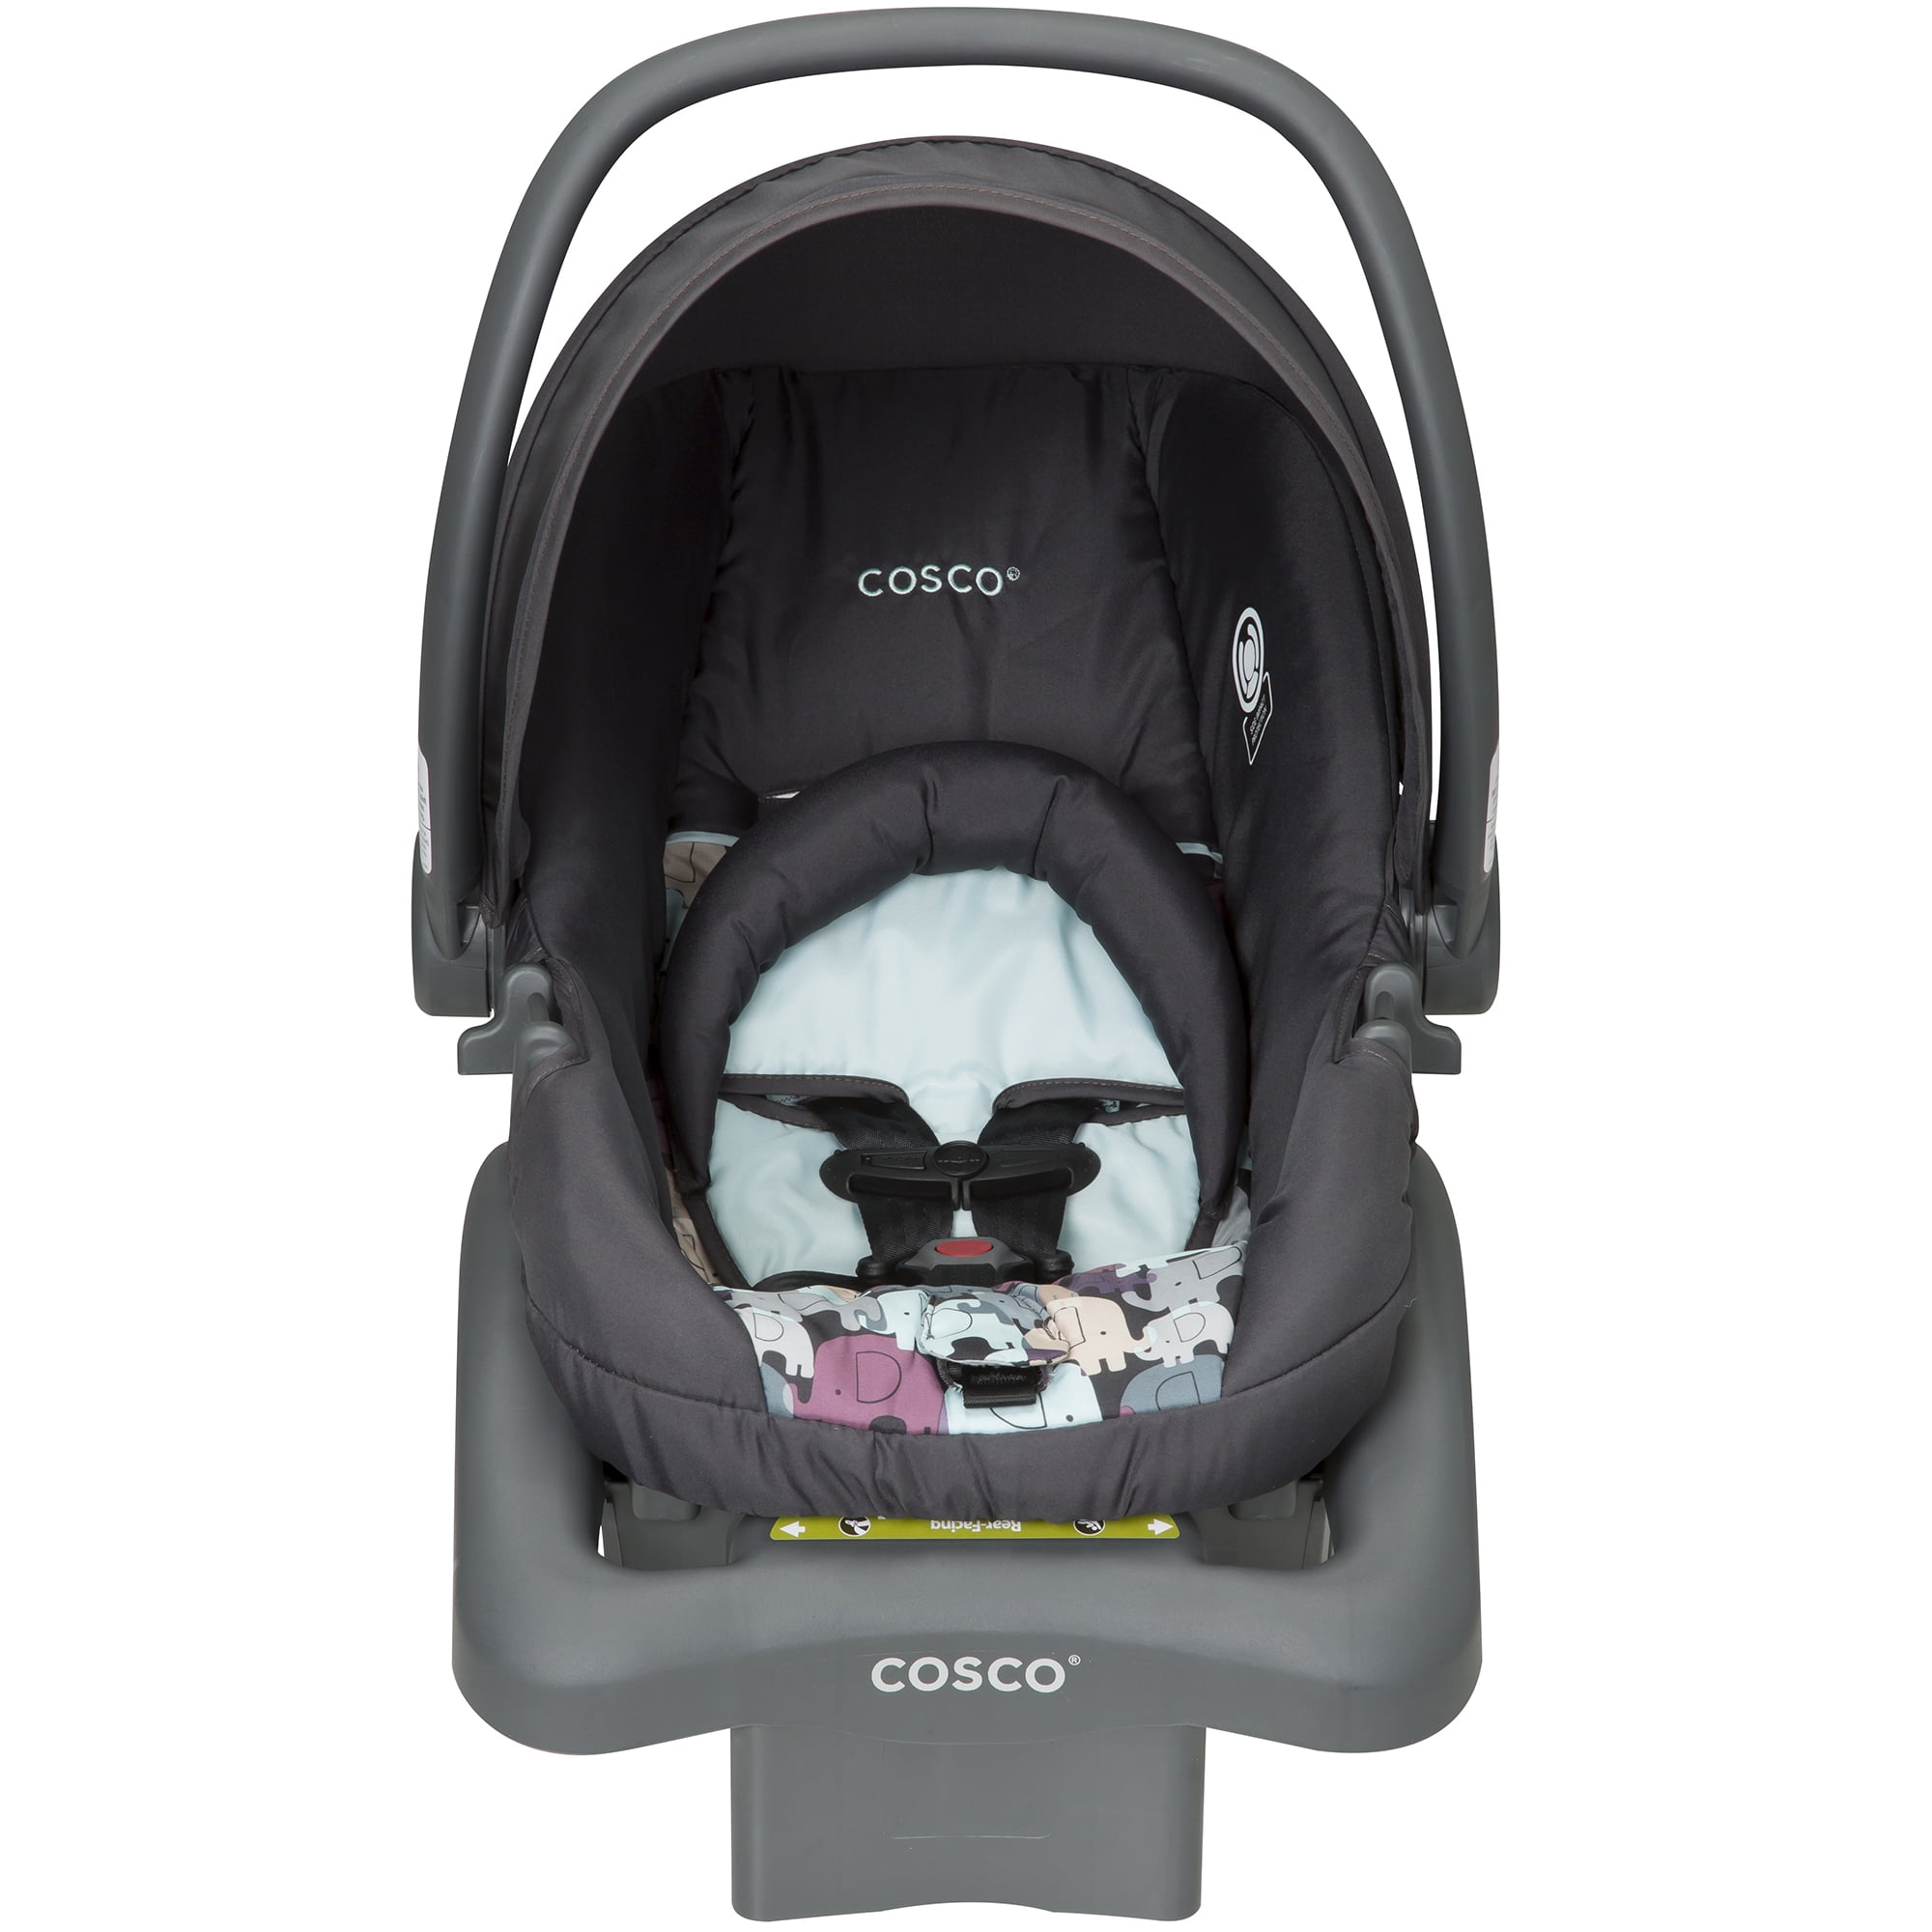 elephant themed car seat and stroller